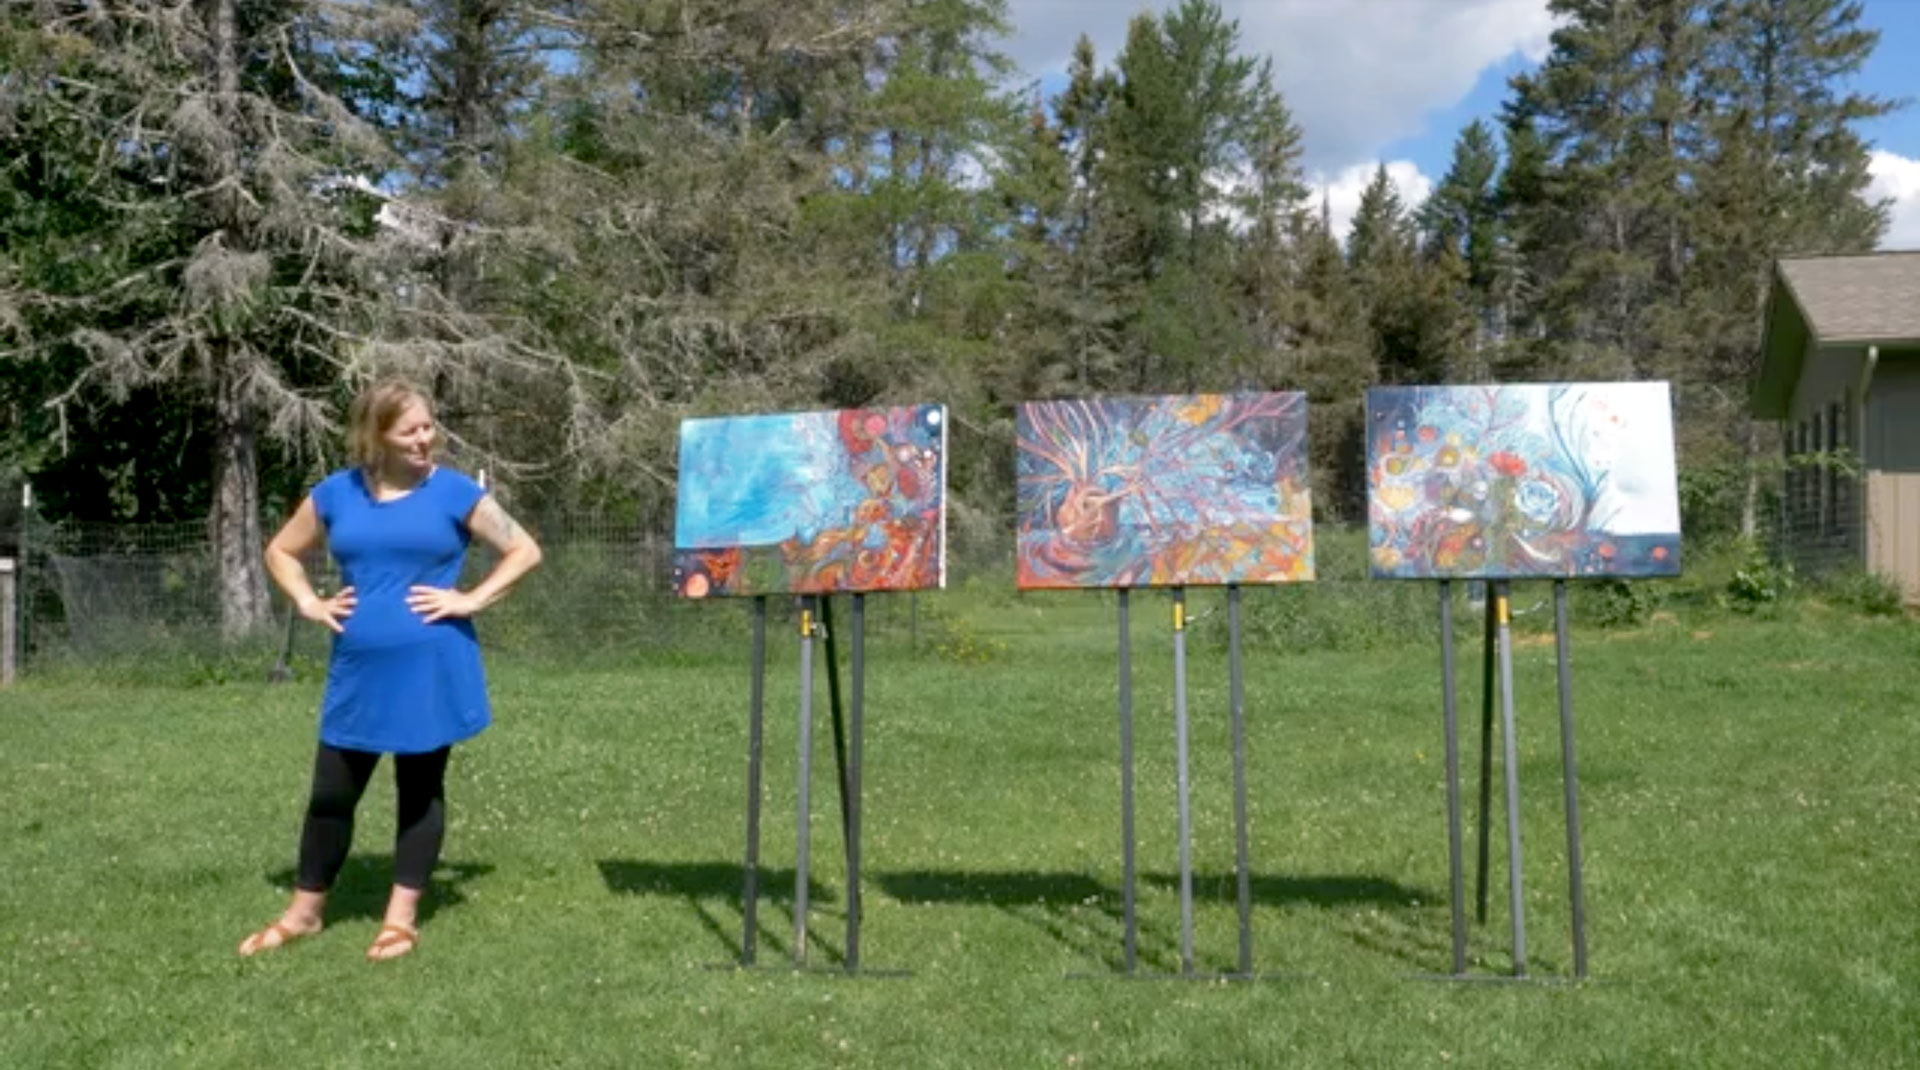 photo of sarah brokke standing next to three canvases on easels in her yard